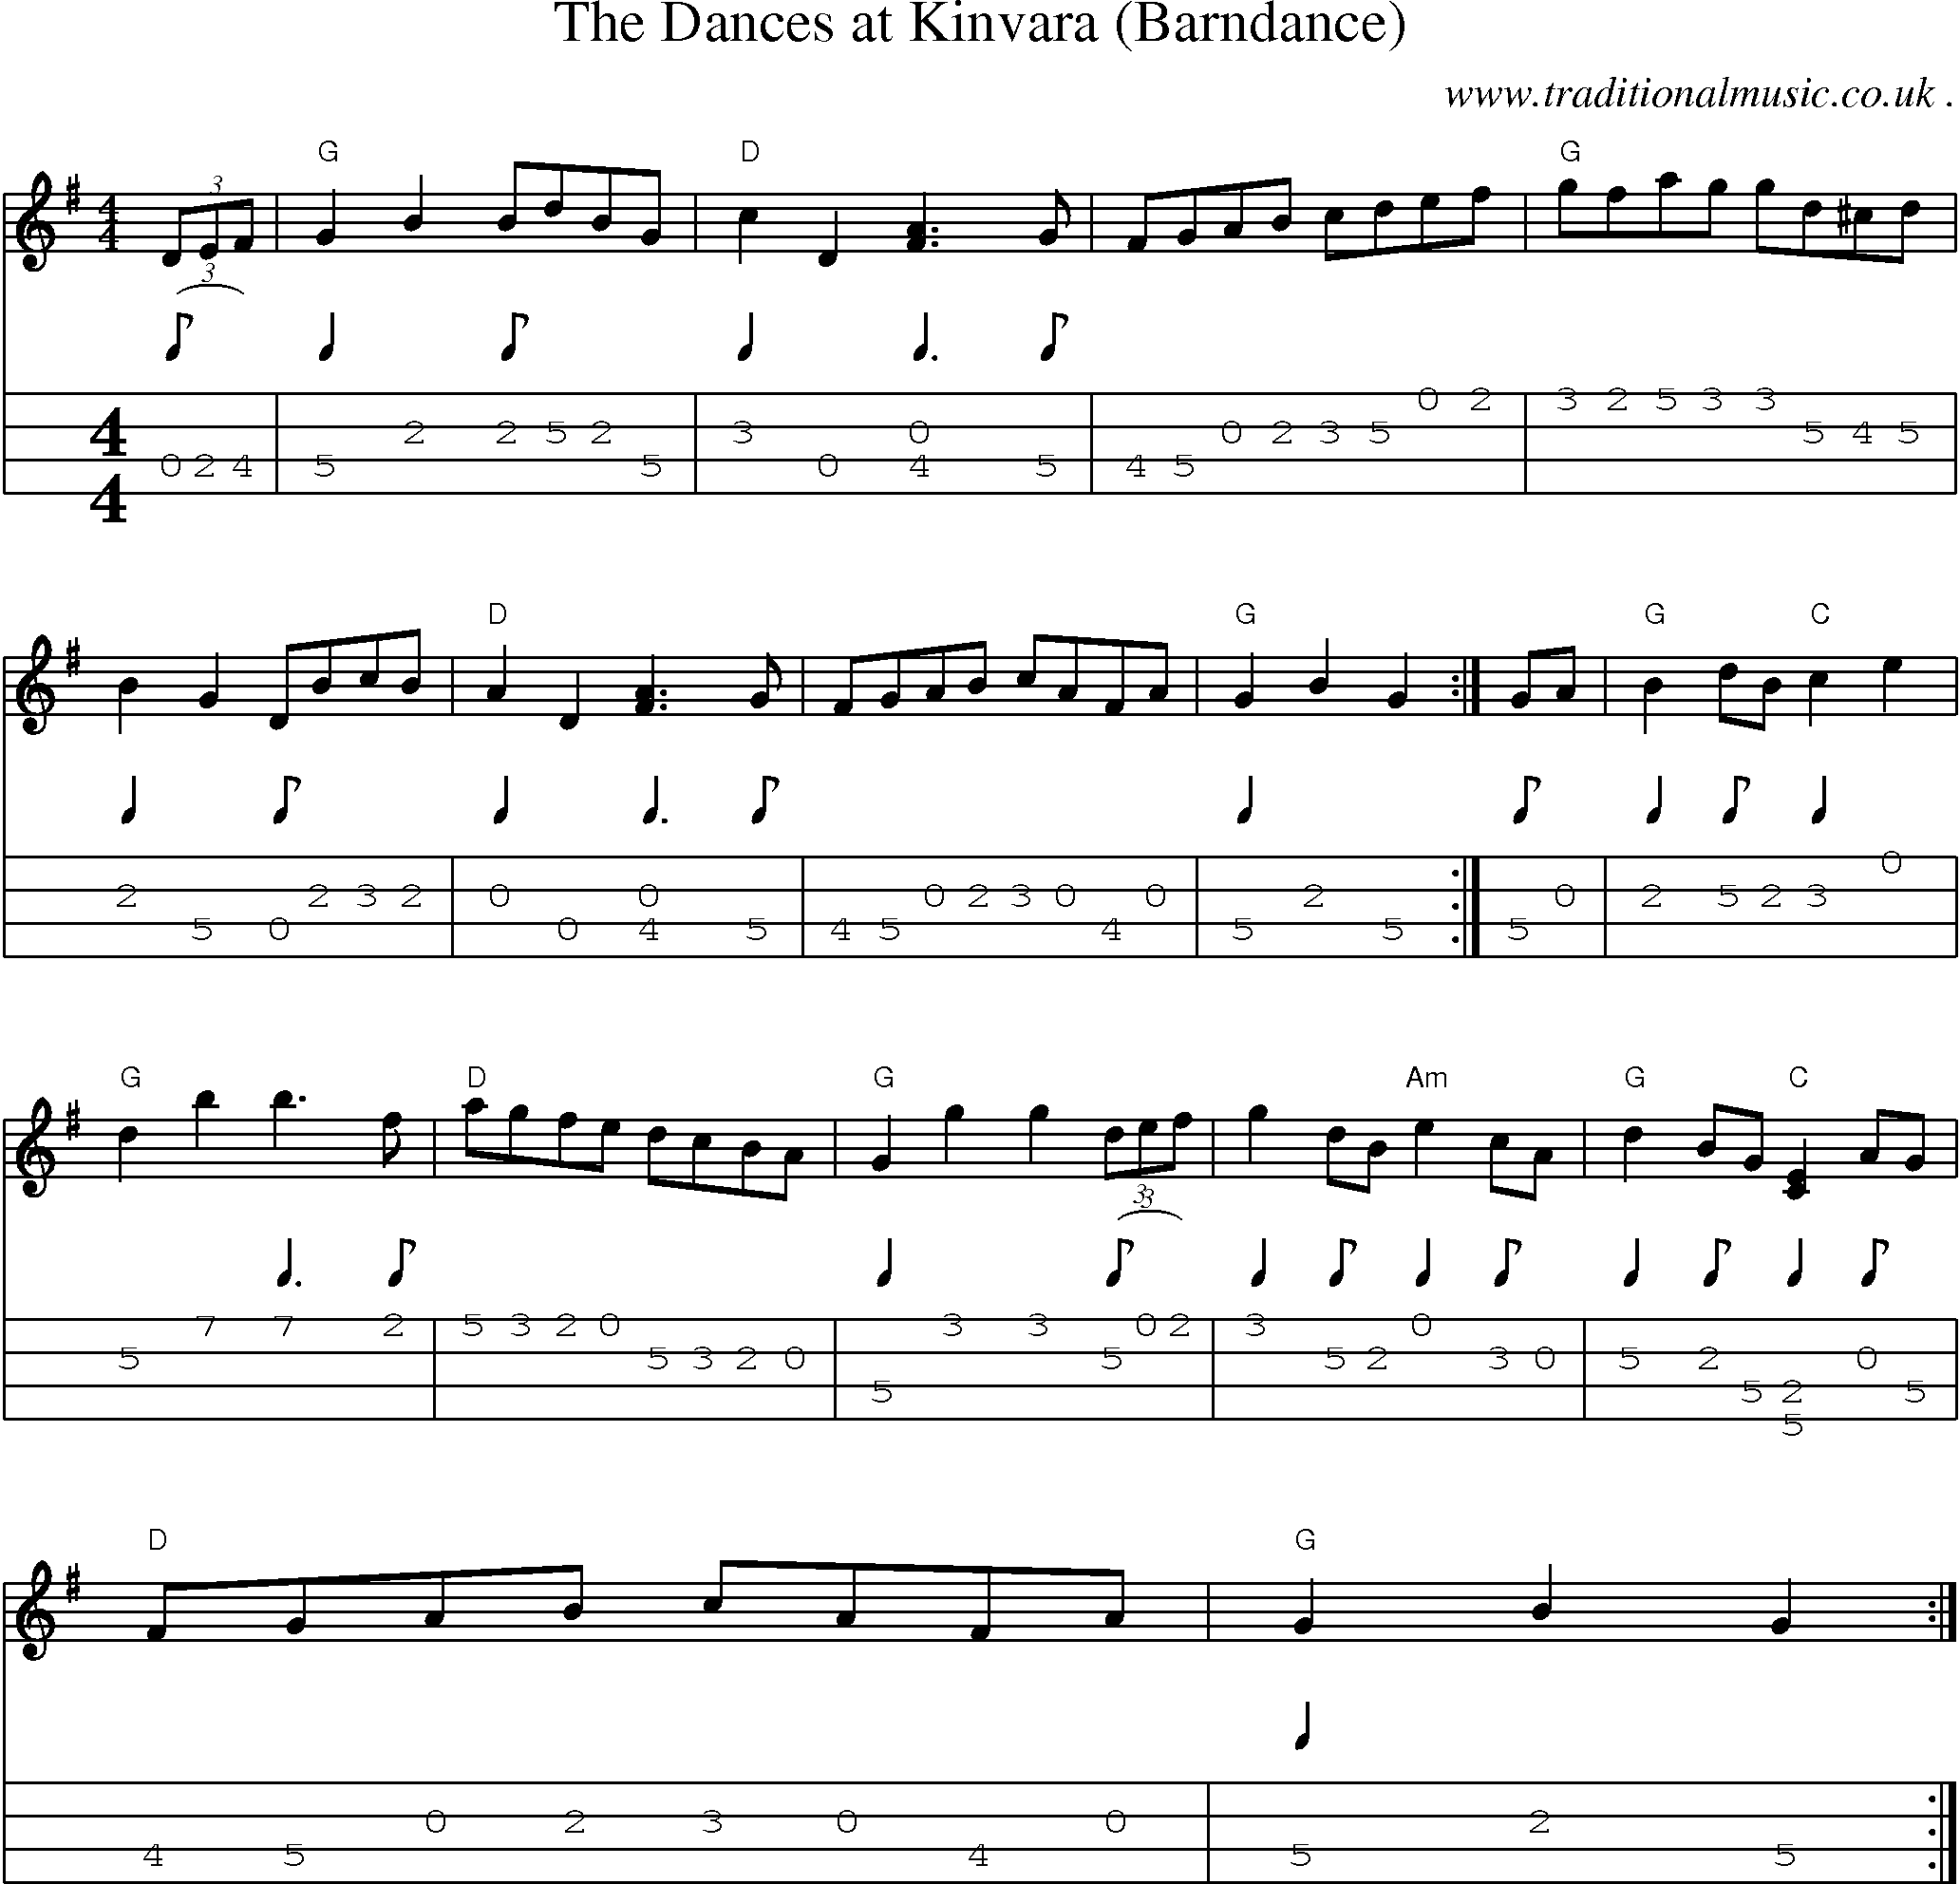 Music Score and Guitar Tabs for The Dances At Kinvara (barndance)